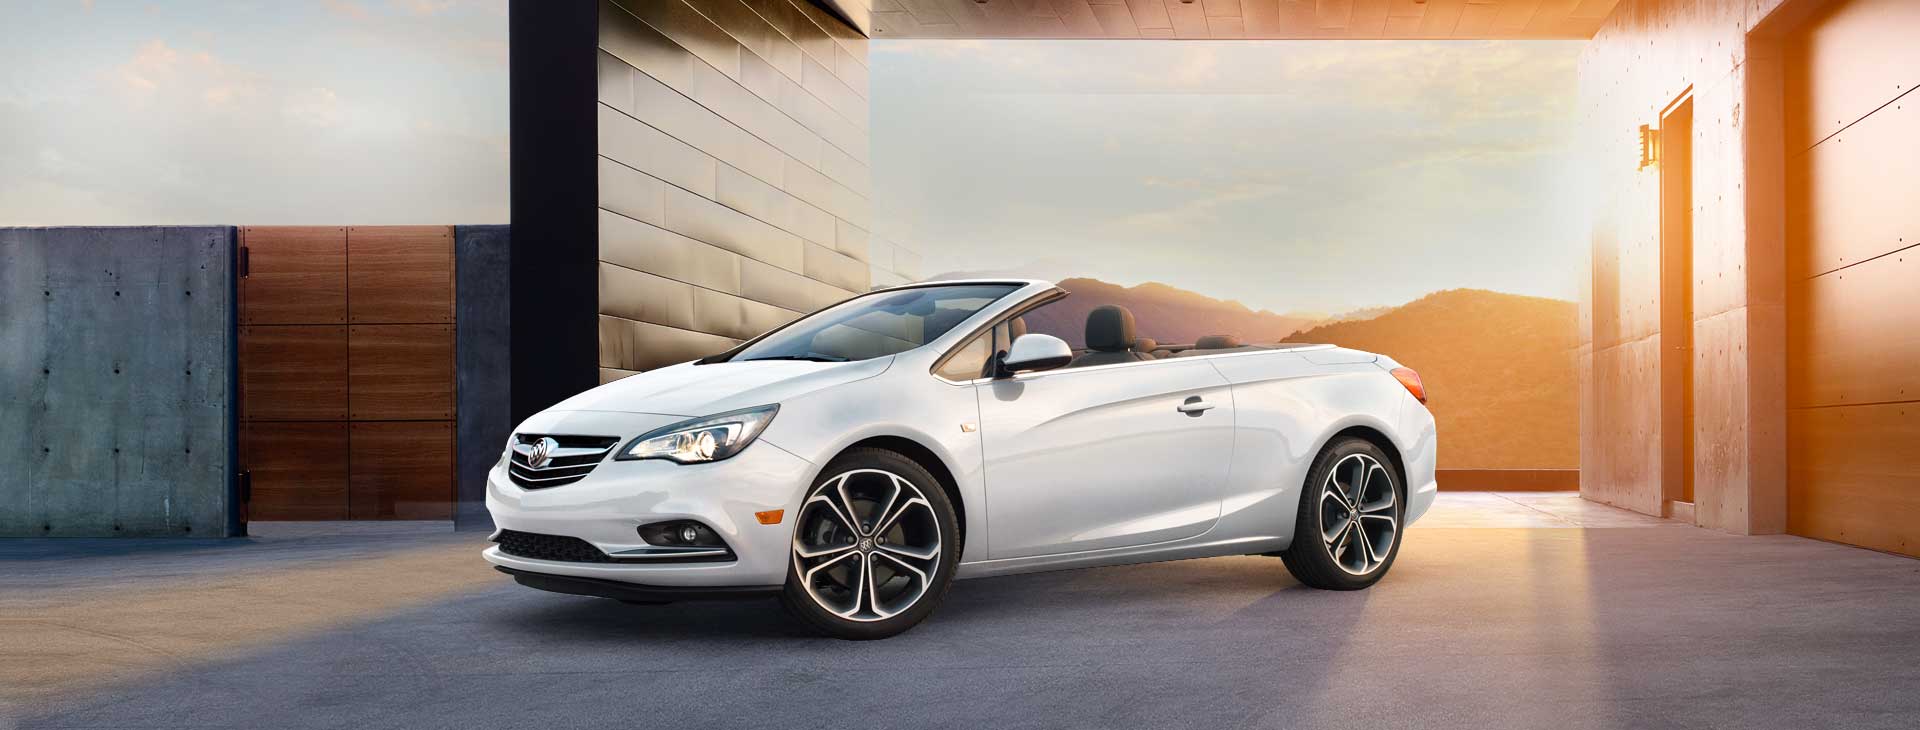 2016 Buick Cascada Colors Released | GM Authority